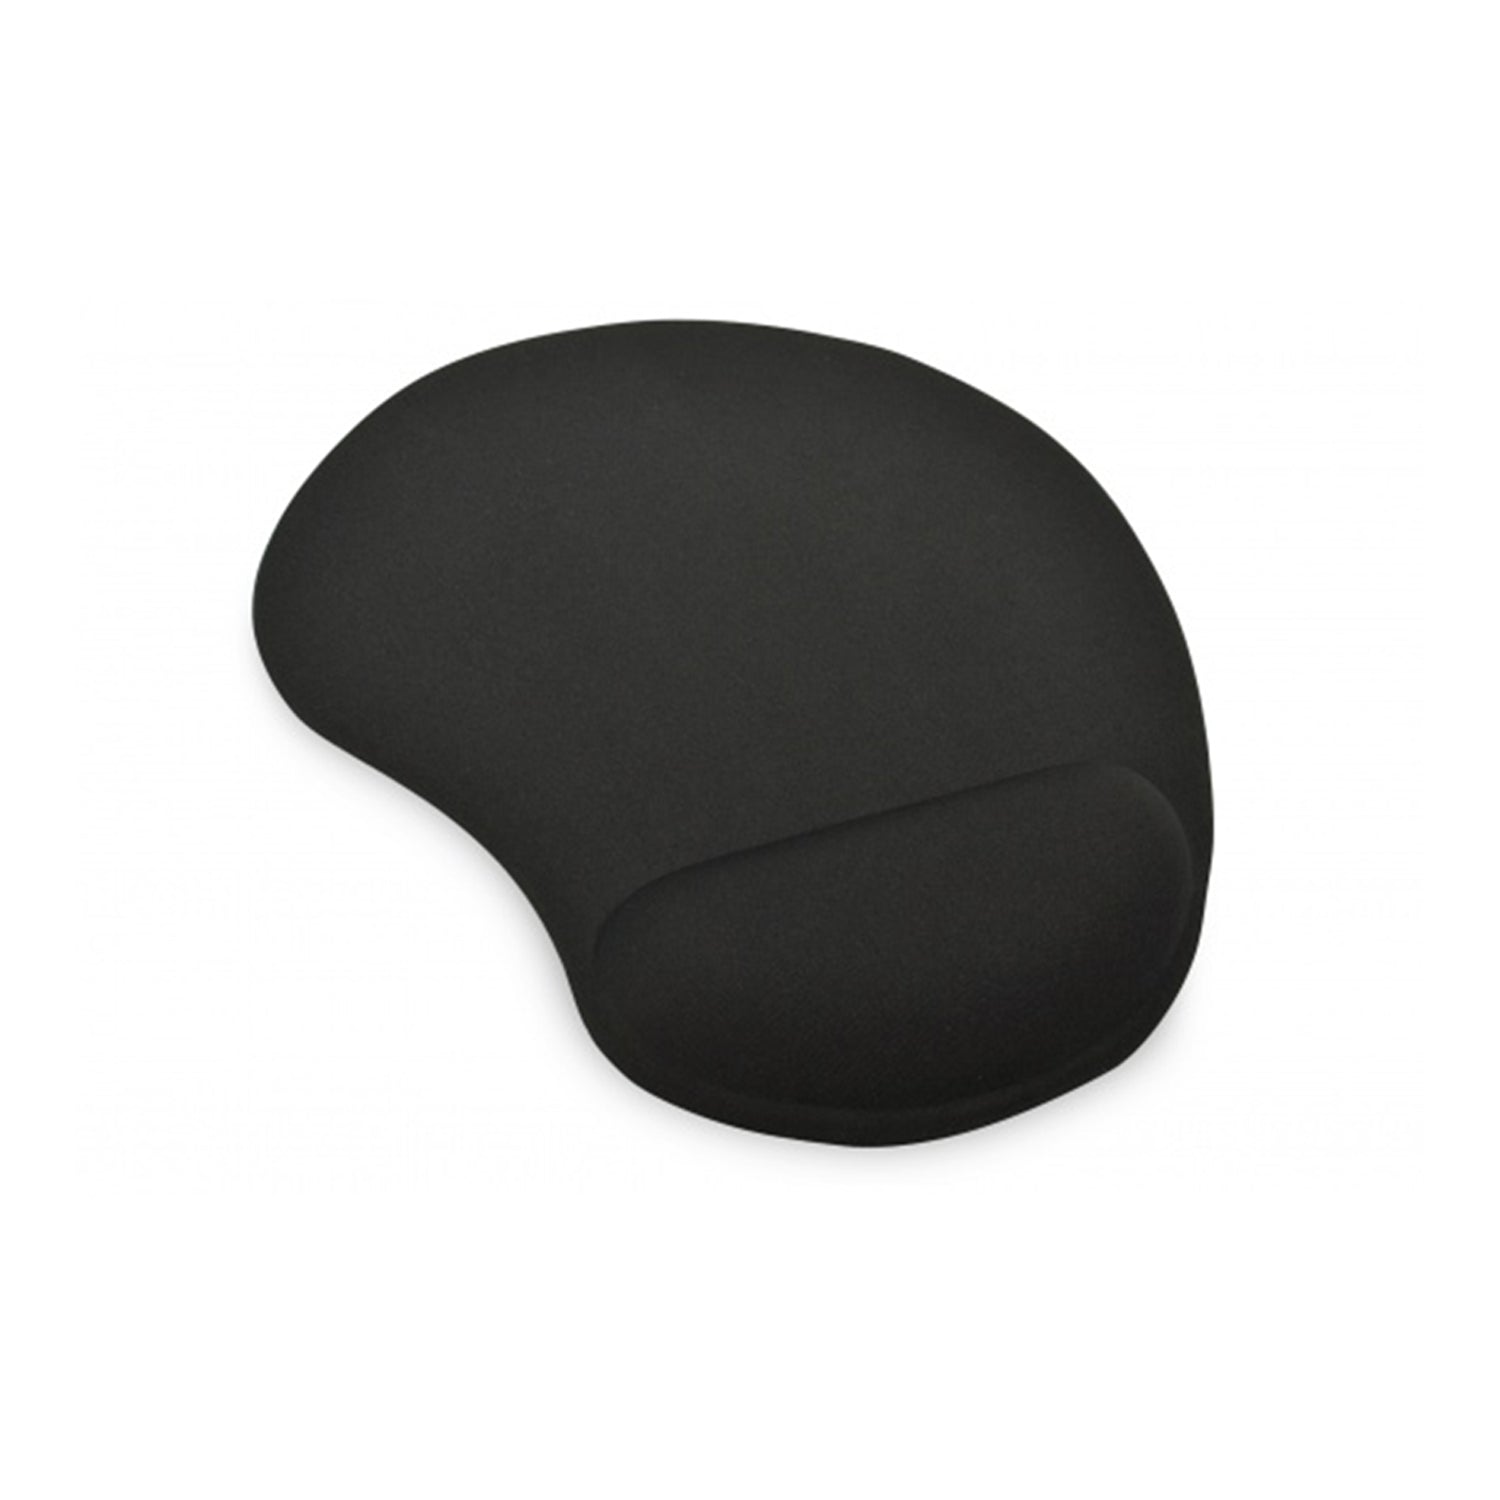 6161 Wrist S Mouse Pad Used For Mouse While Using Computer.